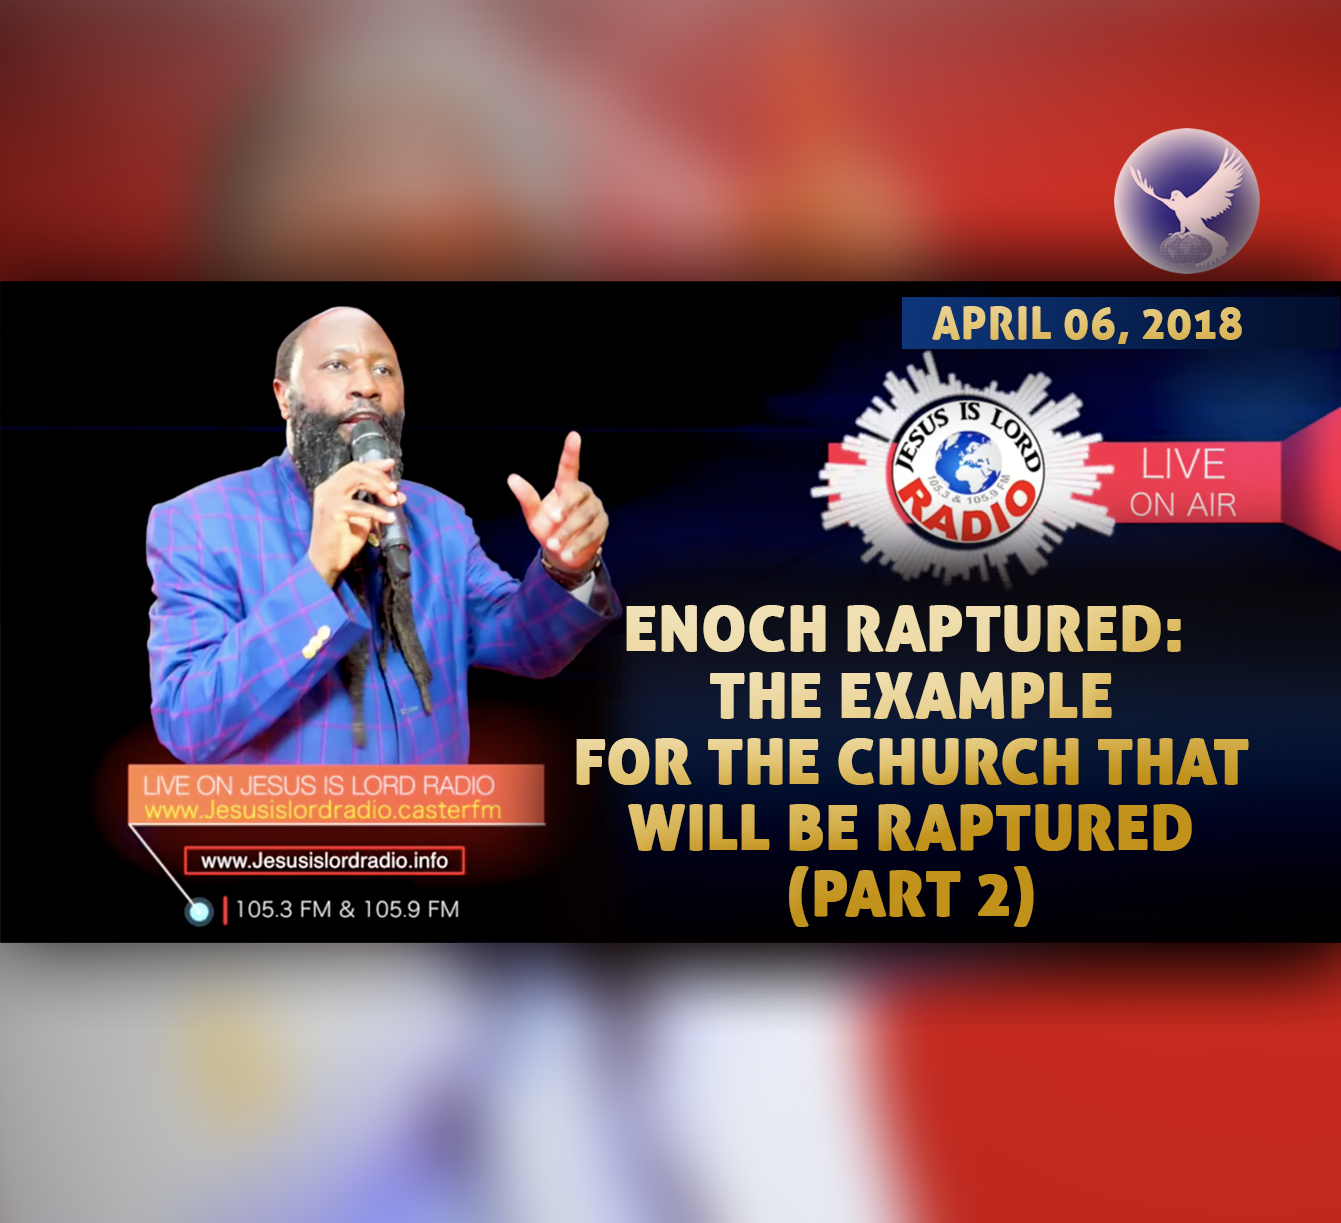 EPISODE 166 - Enoch Raptured: The Example For The Church That'll Be Raptuted Part  2 (06Apr2018) - Prophet Dr. Owuor